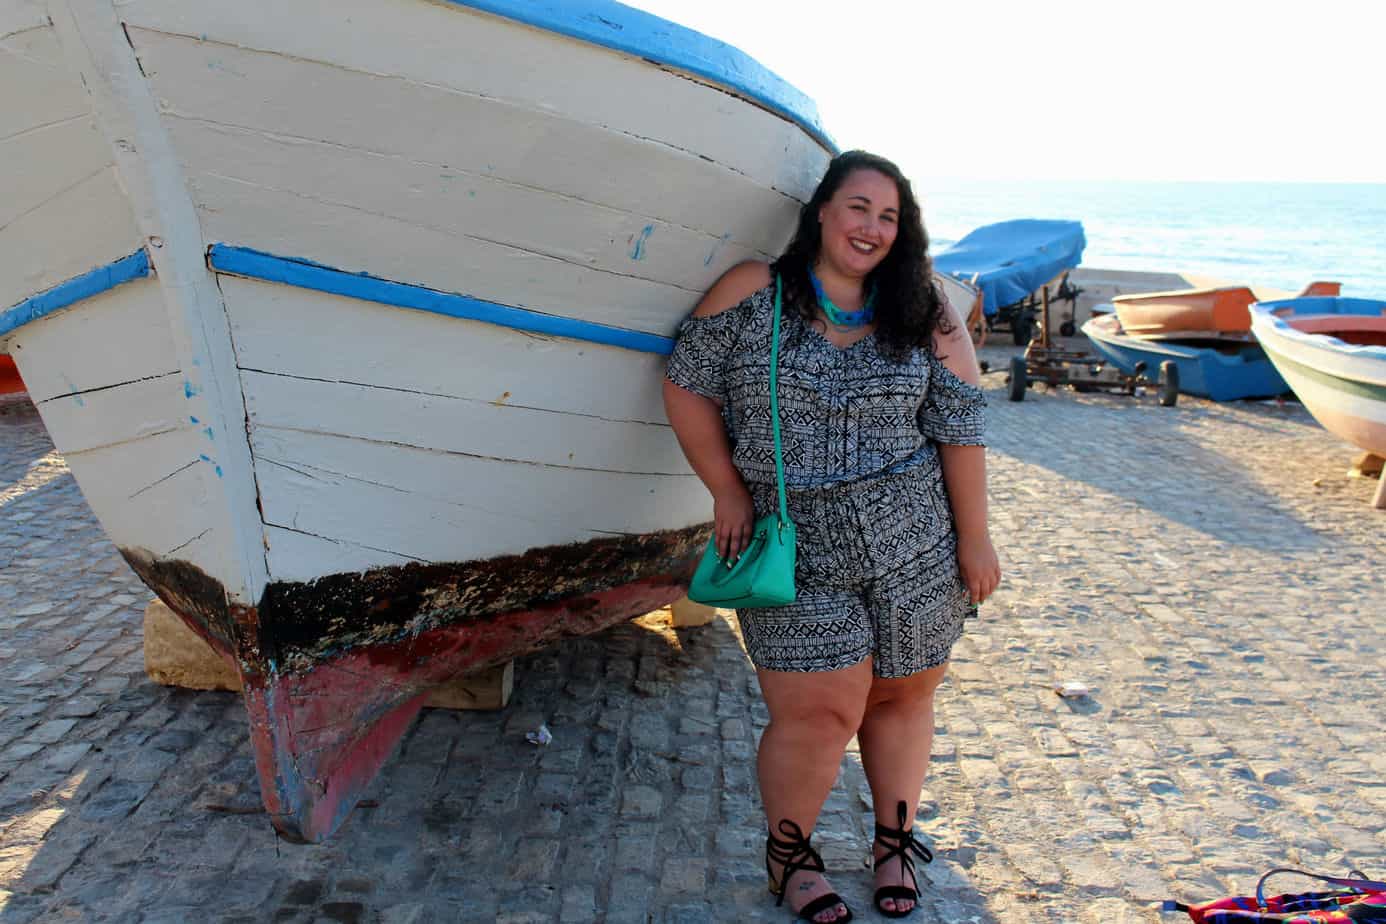 Plus Size Summer Trends in Sicily with JCPenney! 